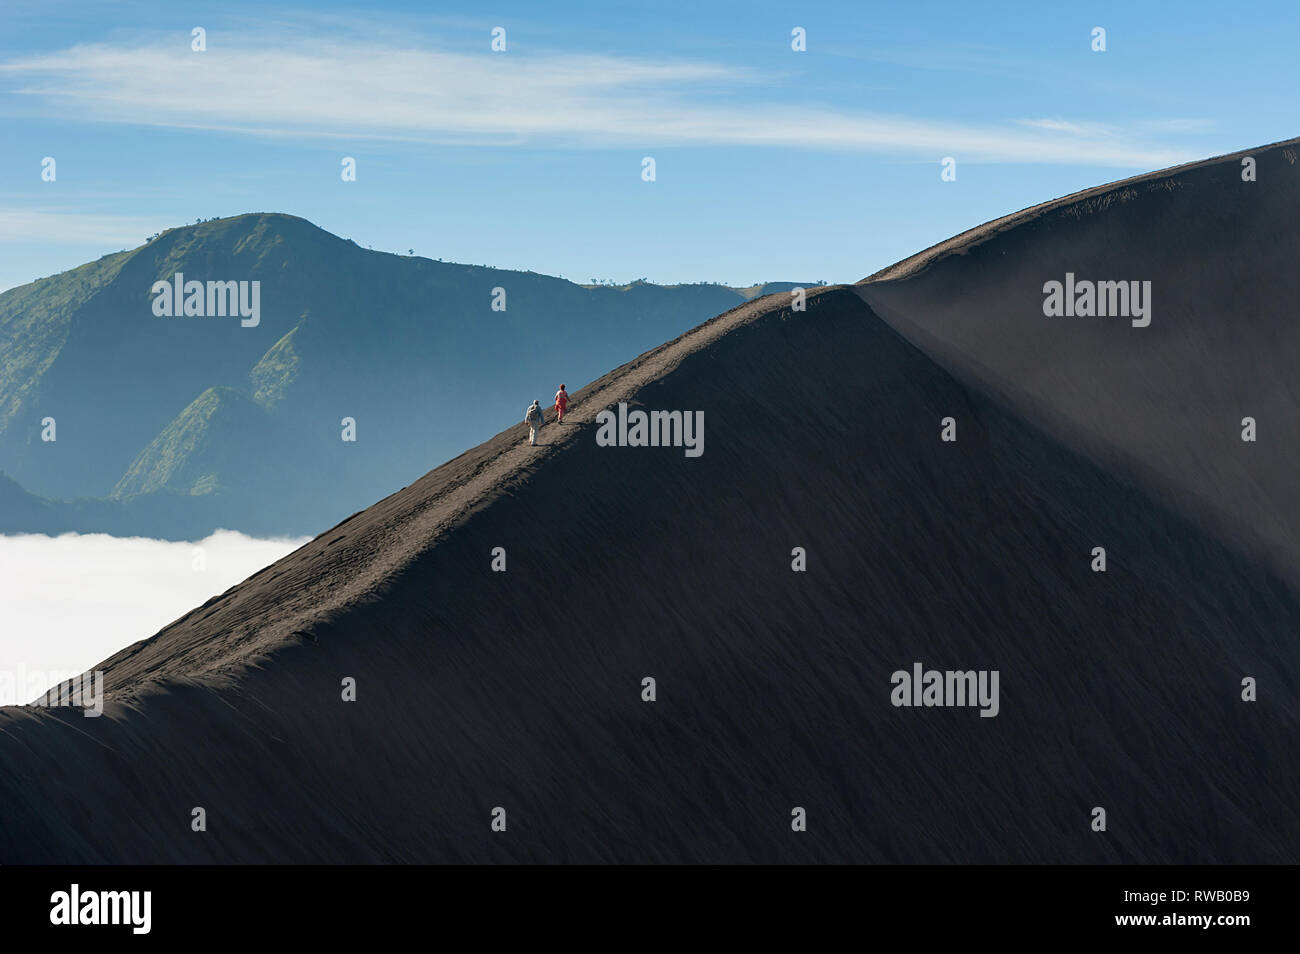 Beautiful morning mountain landscape with unrecognizable hikers on steep section of crater rim ridge. Stock Photo